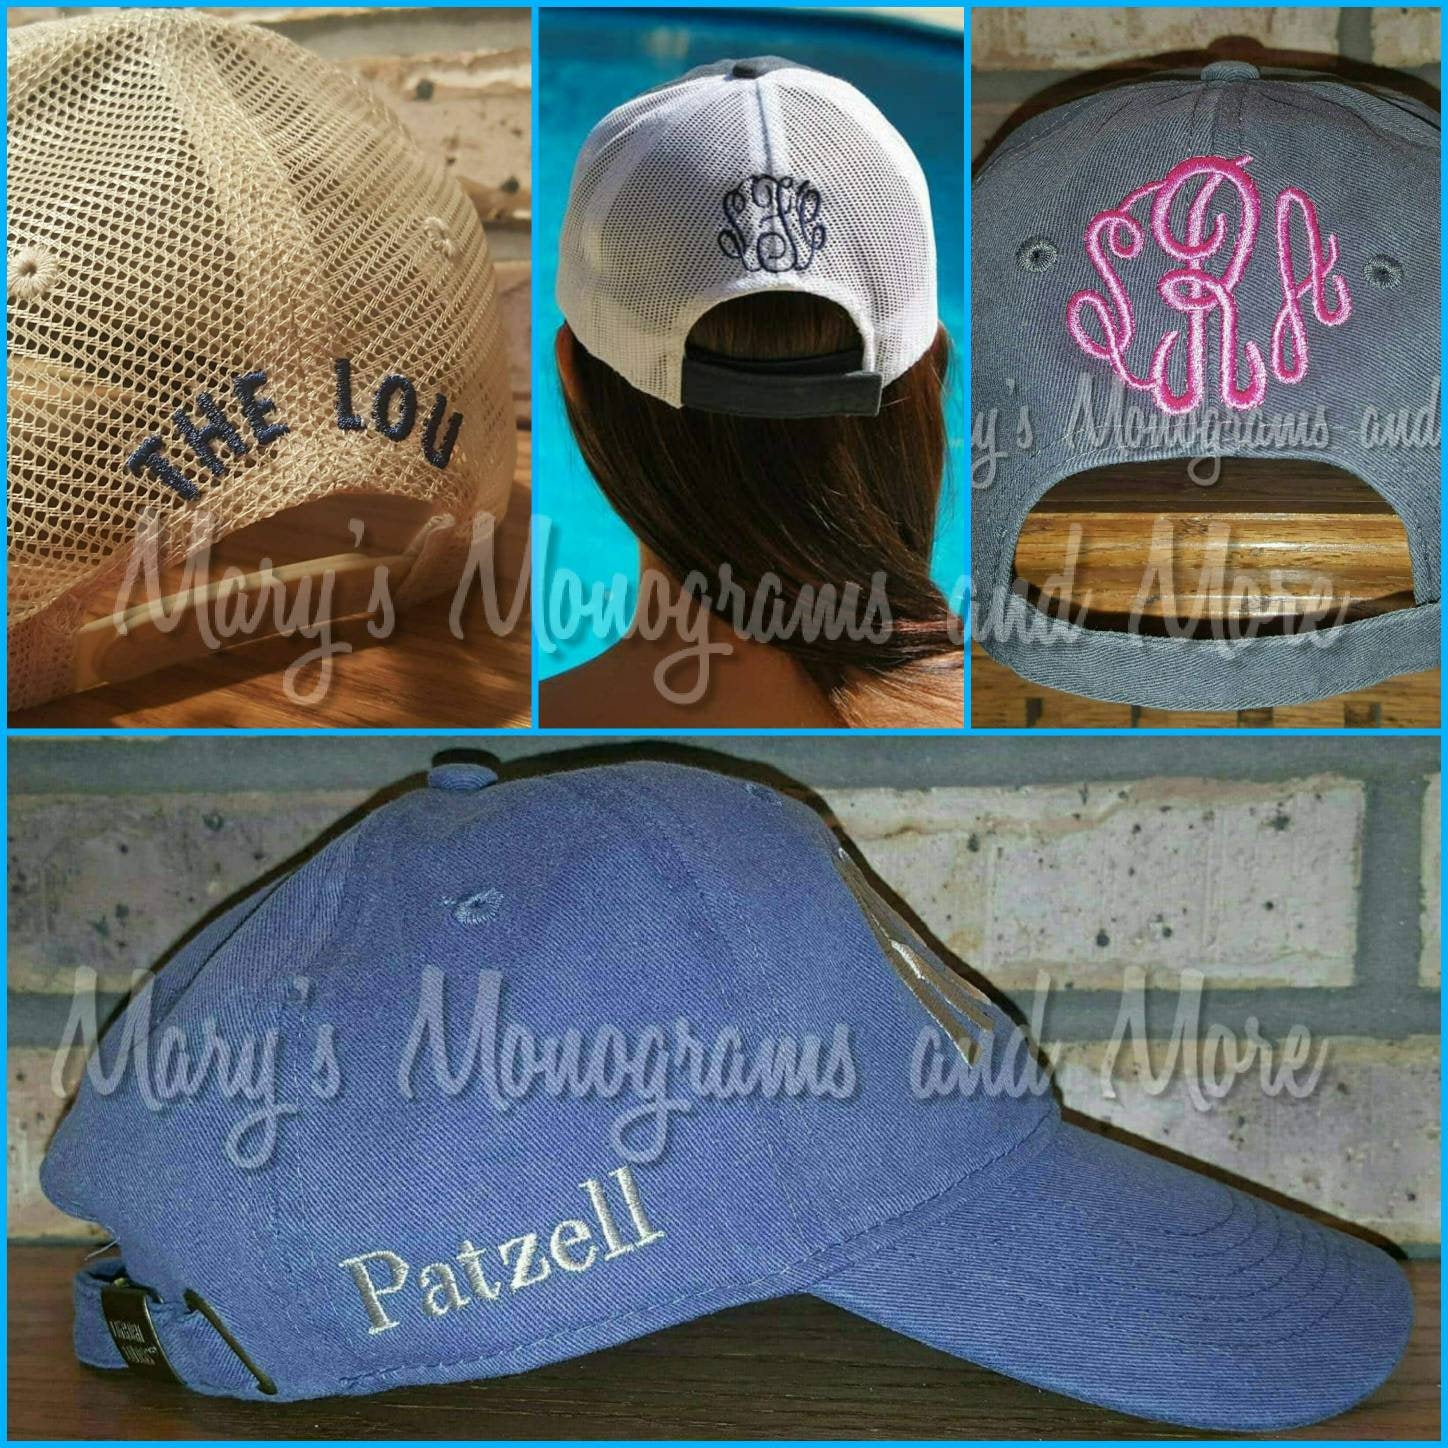 I'll bring the bad decisions, alcohol, bail money, girls trip, night out, bff, bachelorette, party, drinking, custom, trucker hat